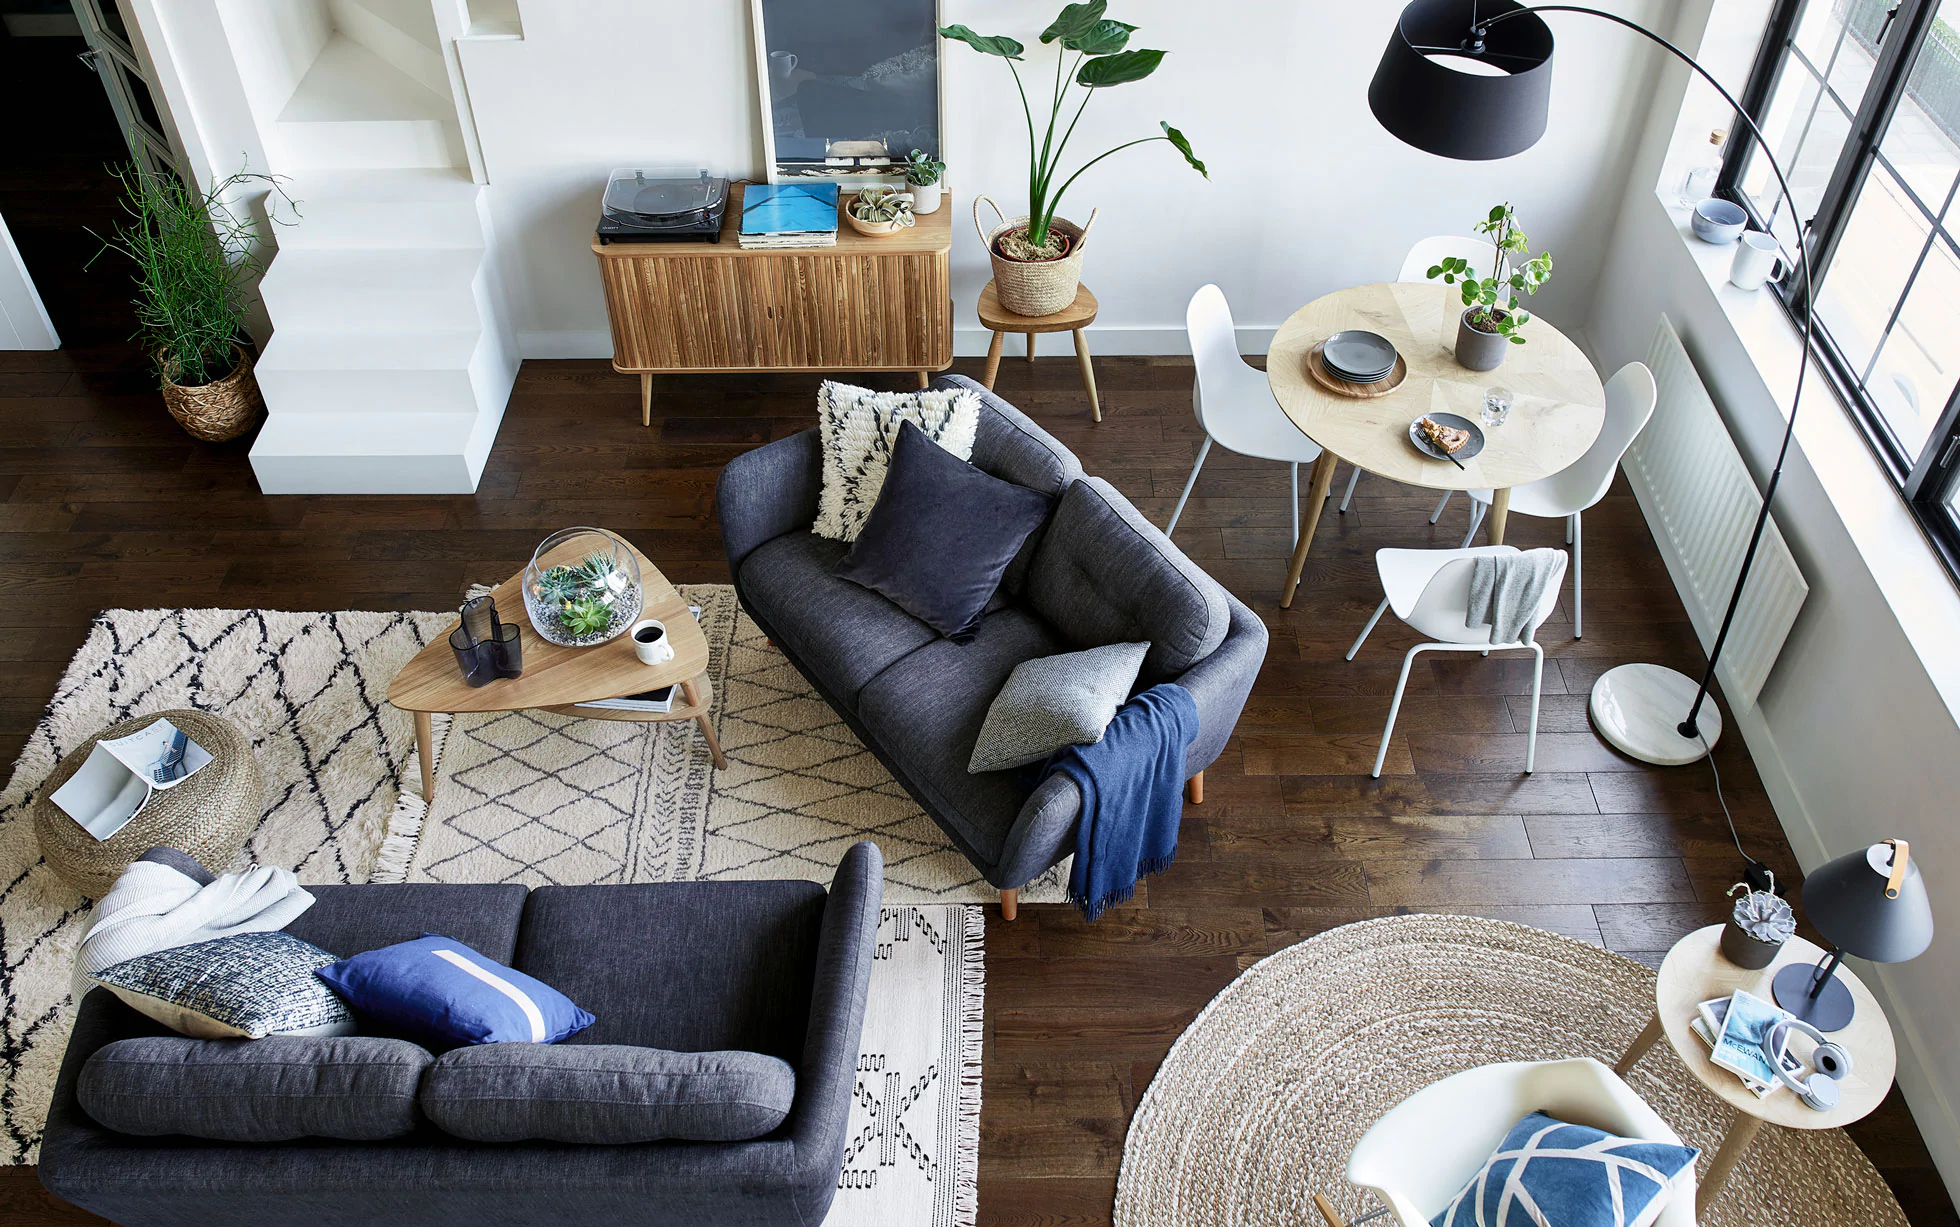 How to furnish a living room? Remember about the size